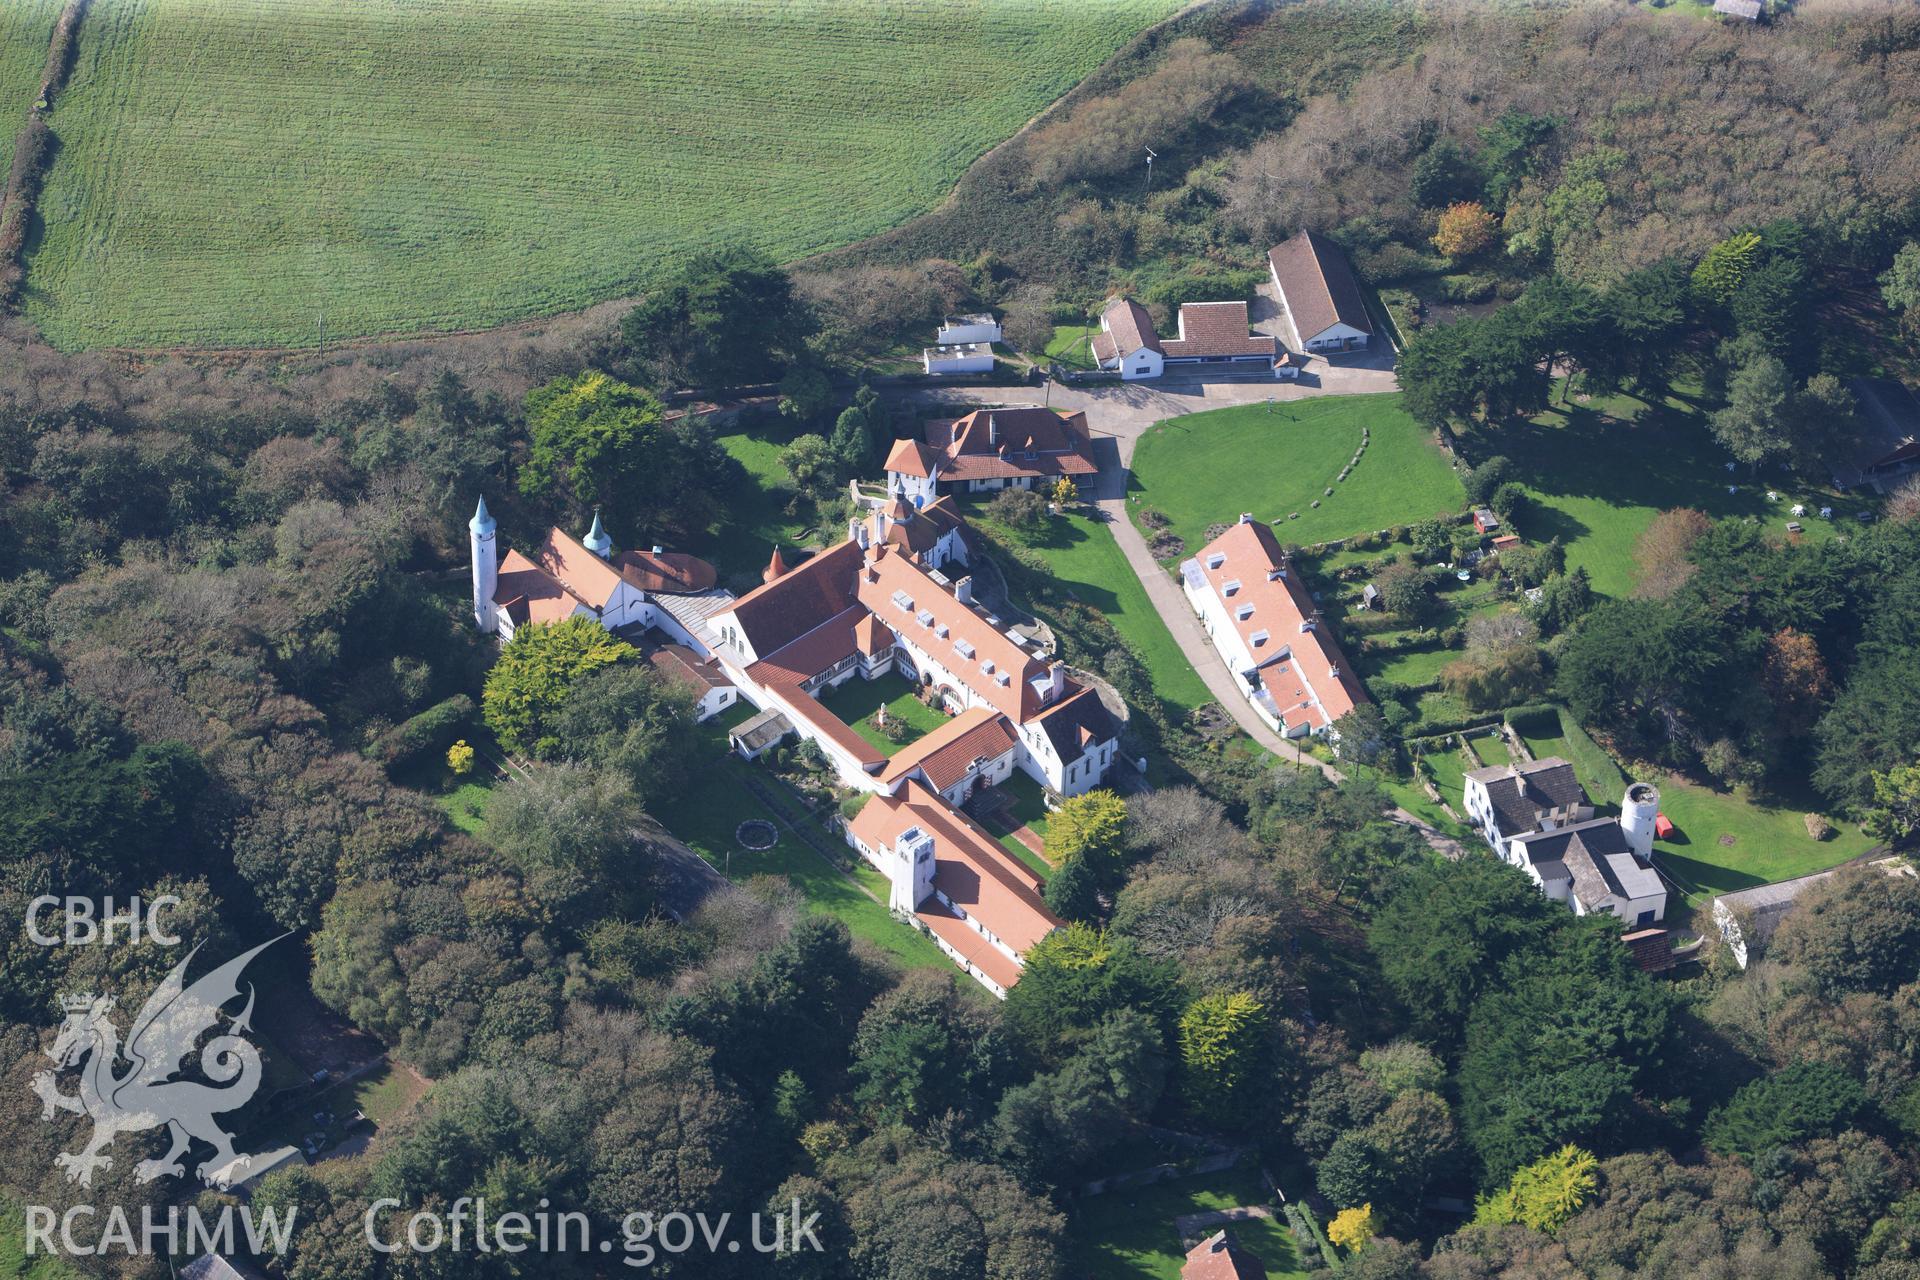 RCAHMW colour oblique photograph of Caldey Monastery, Caldey Island, viewed from the east. Taken by Toby Driver and Oliver Davies on 28/09/2011.